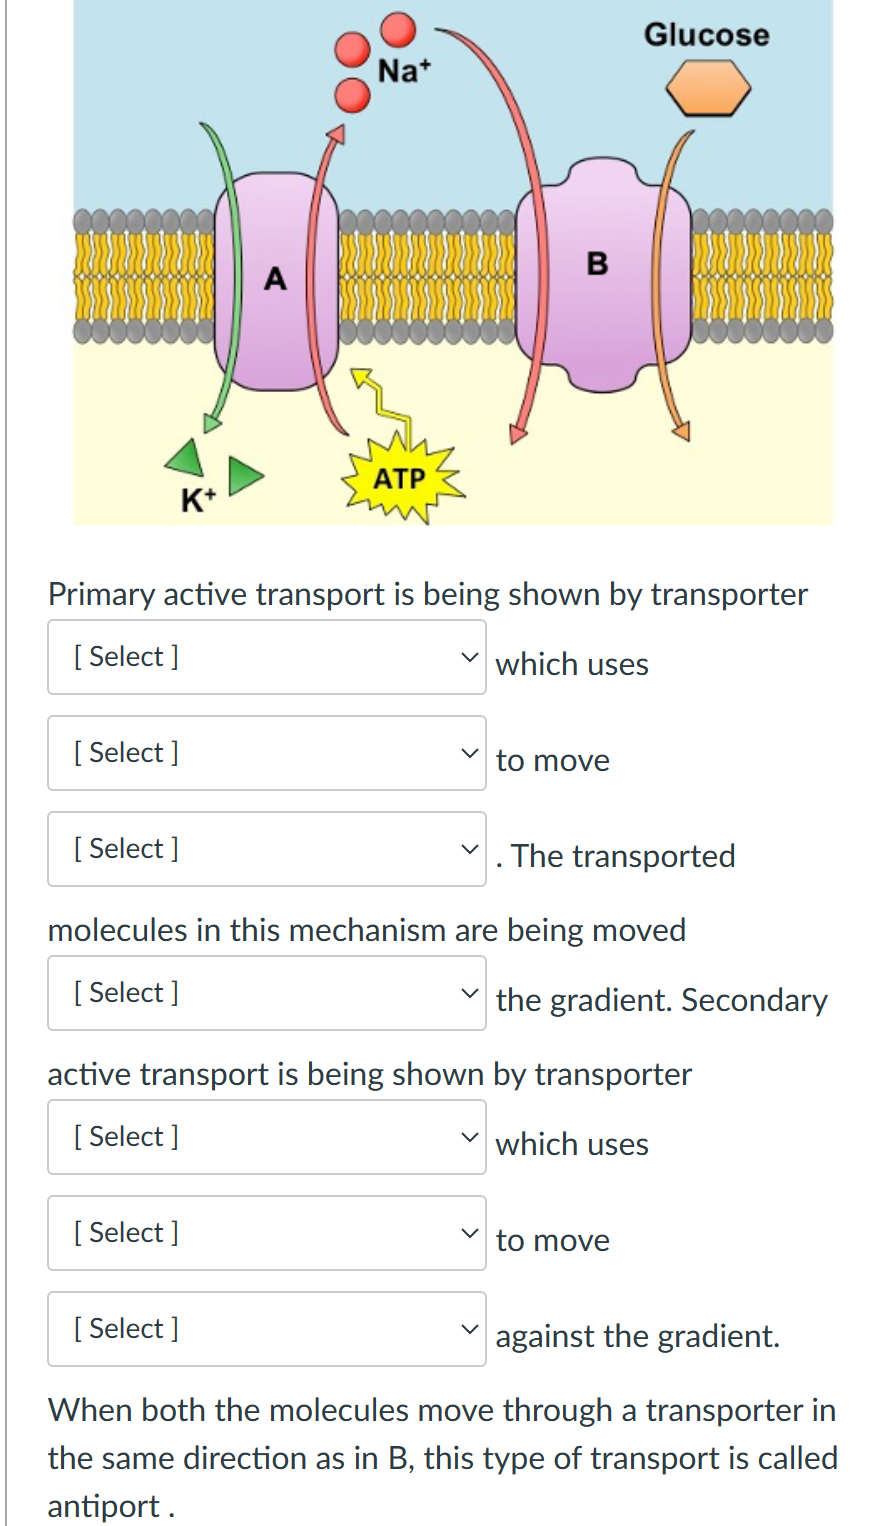 K+
[Select]
[Select]
A
Na+
Primary active transport is being shown by transporter
[Select]
which uses
[Select]
ATP
[Select]
B
The transported
molecules in this mechanism are being moved
[Select]
to move
Glucose
active transport is being shown by transporter
[Select]
which uses
the gradient. Secondary
to move
against the gradient.
When both the molecules move through a transporter in
the same direction as in B, this type of transport is called
antiport.